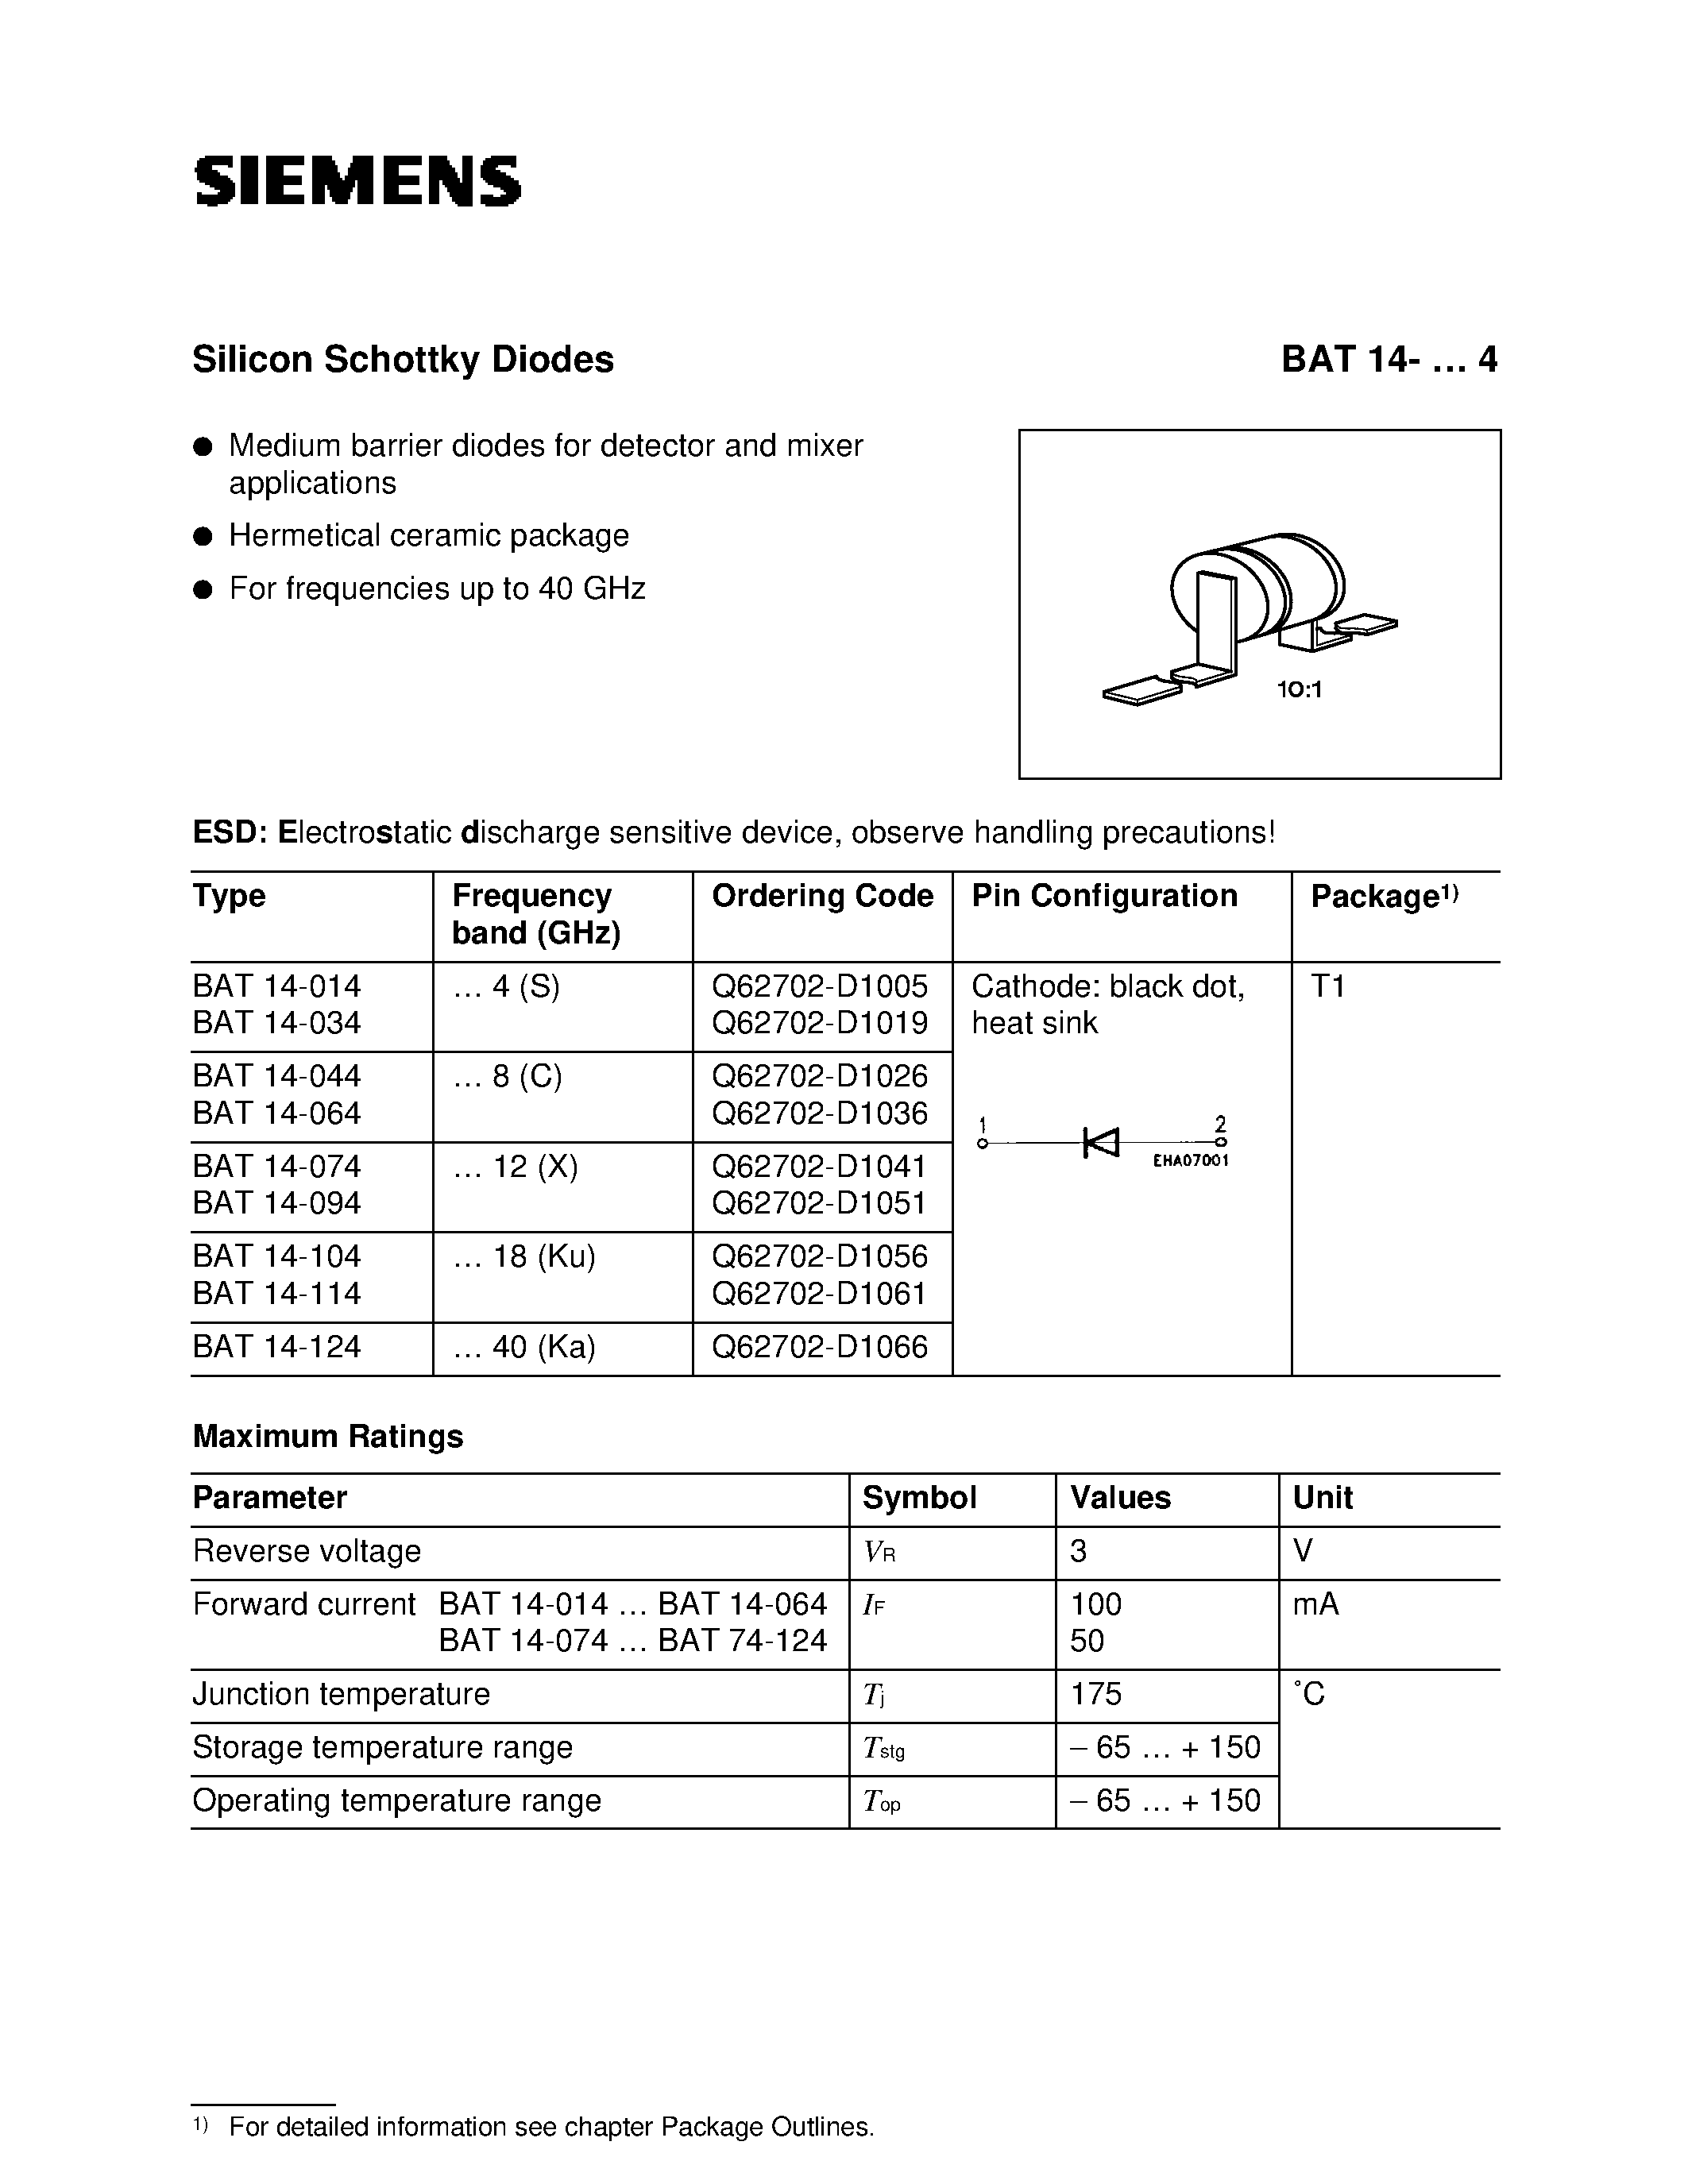 Datasheet BAT14-094 - HiRel Silicon Schottky Diode (HiRel Discrete and Microwave Semiconductor Medium barrier diodes for detector and mixer applications) page 1